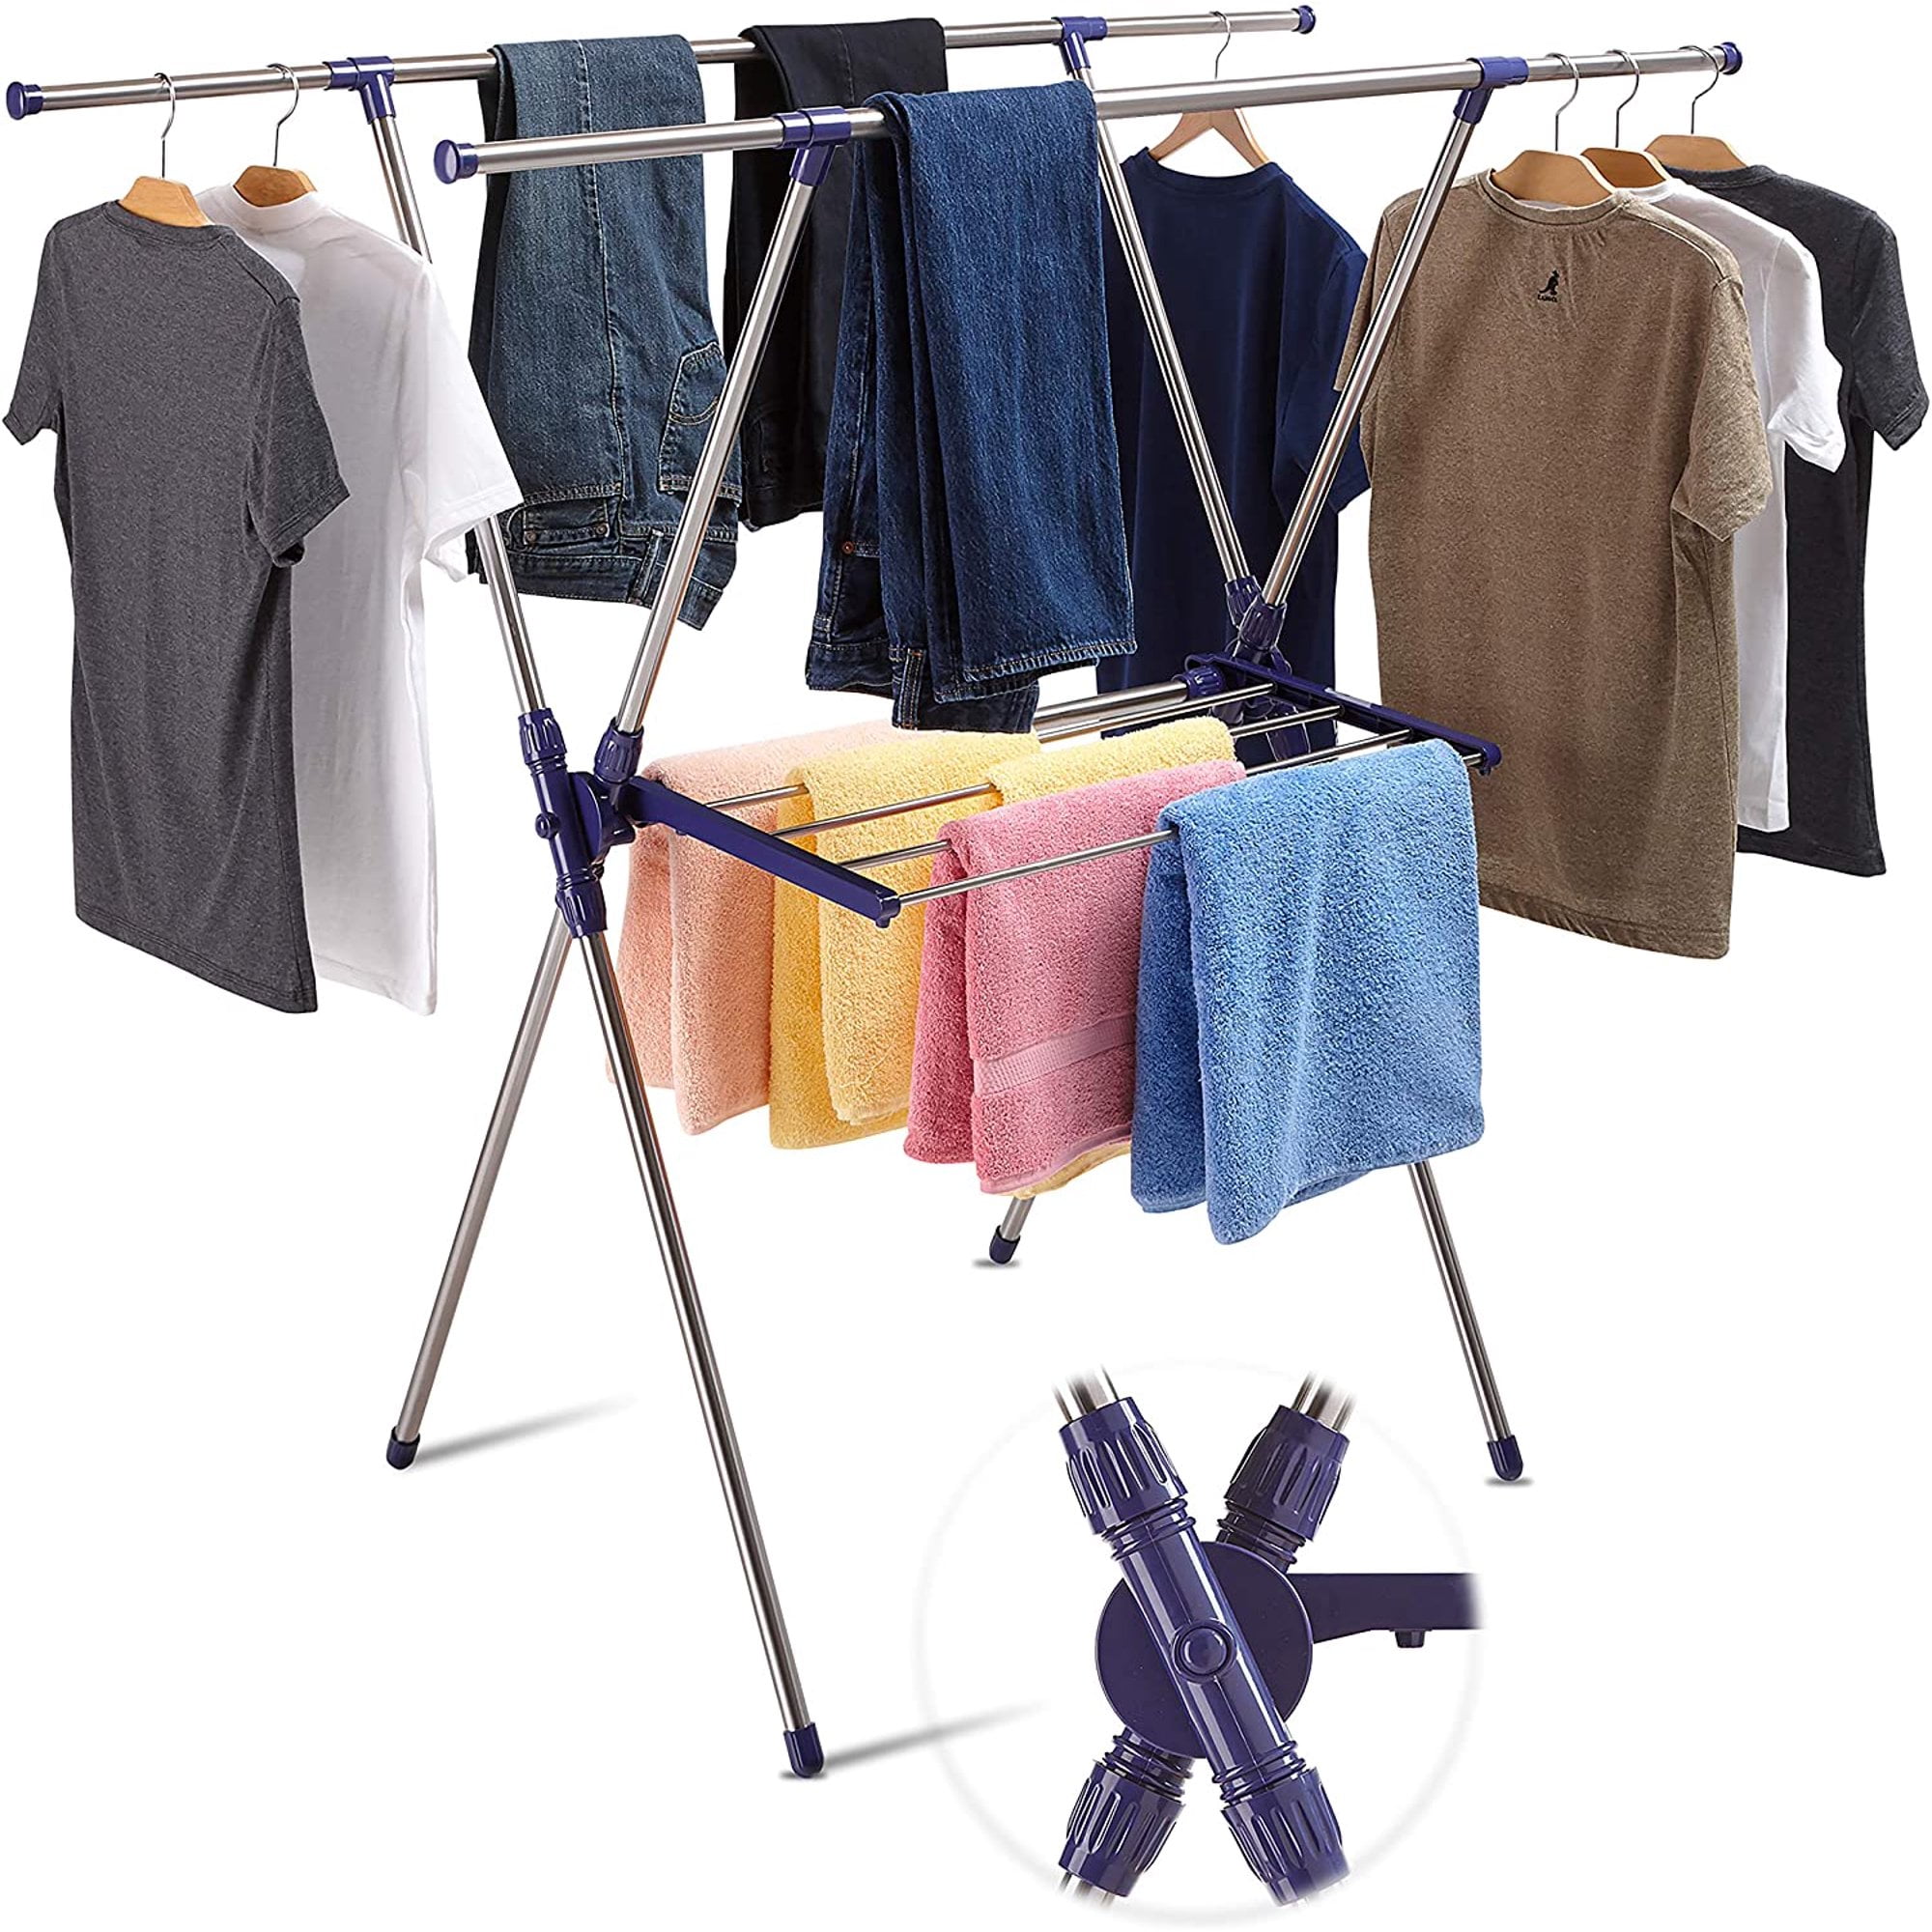 Retractable Stainless Steel Clothesline Laundry Line Clothes Drying Stand Rack 